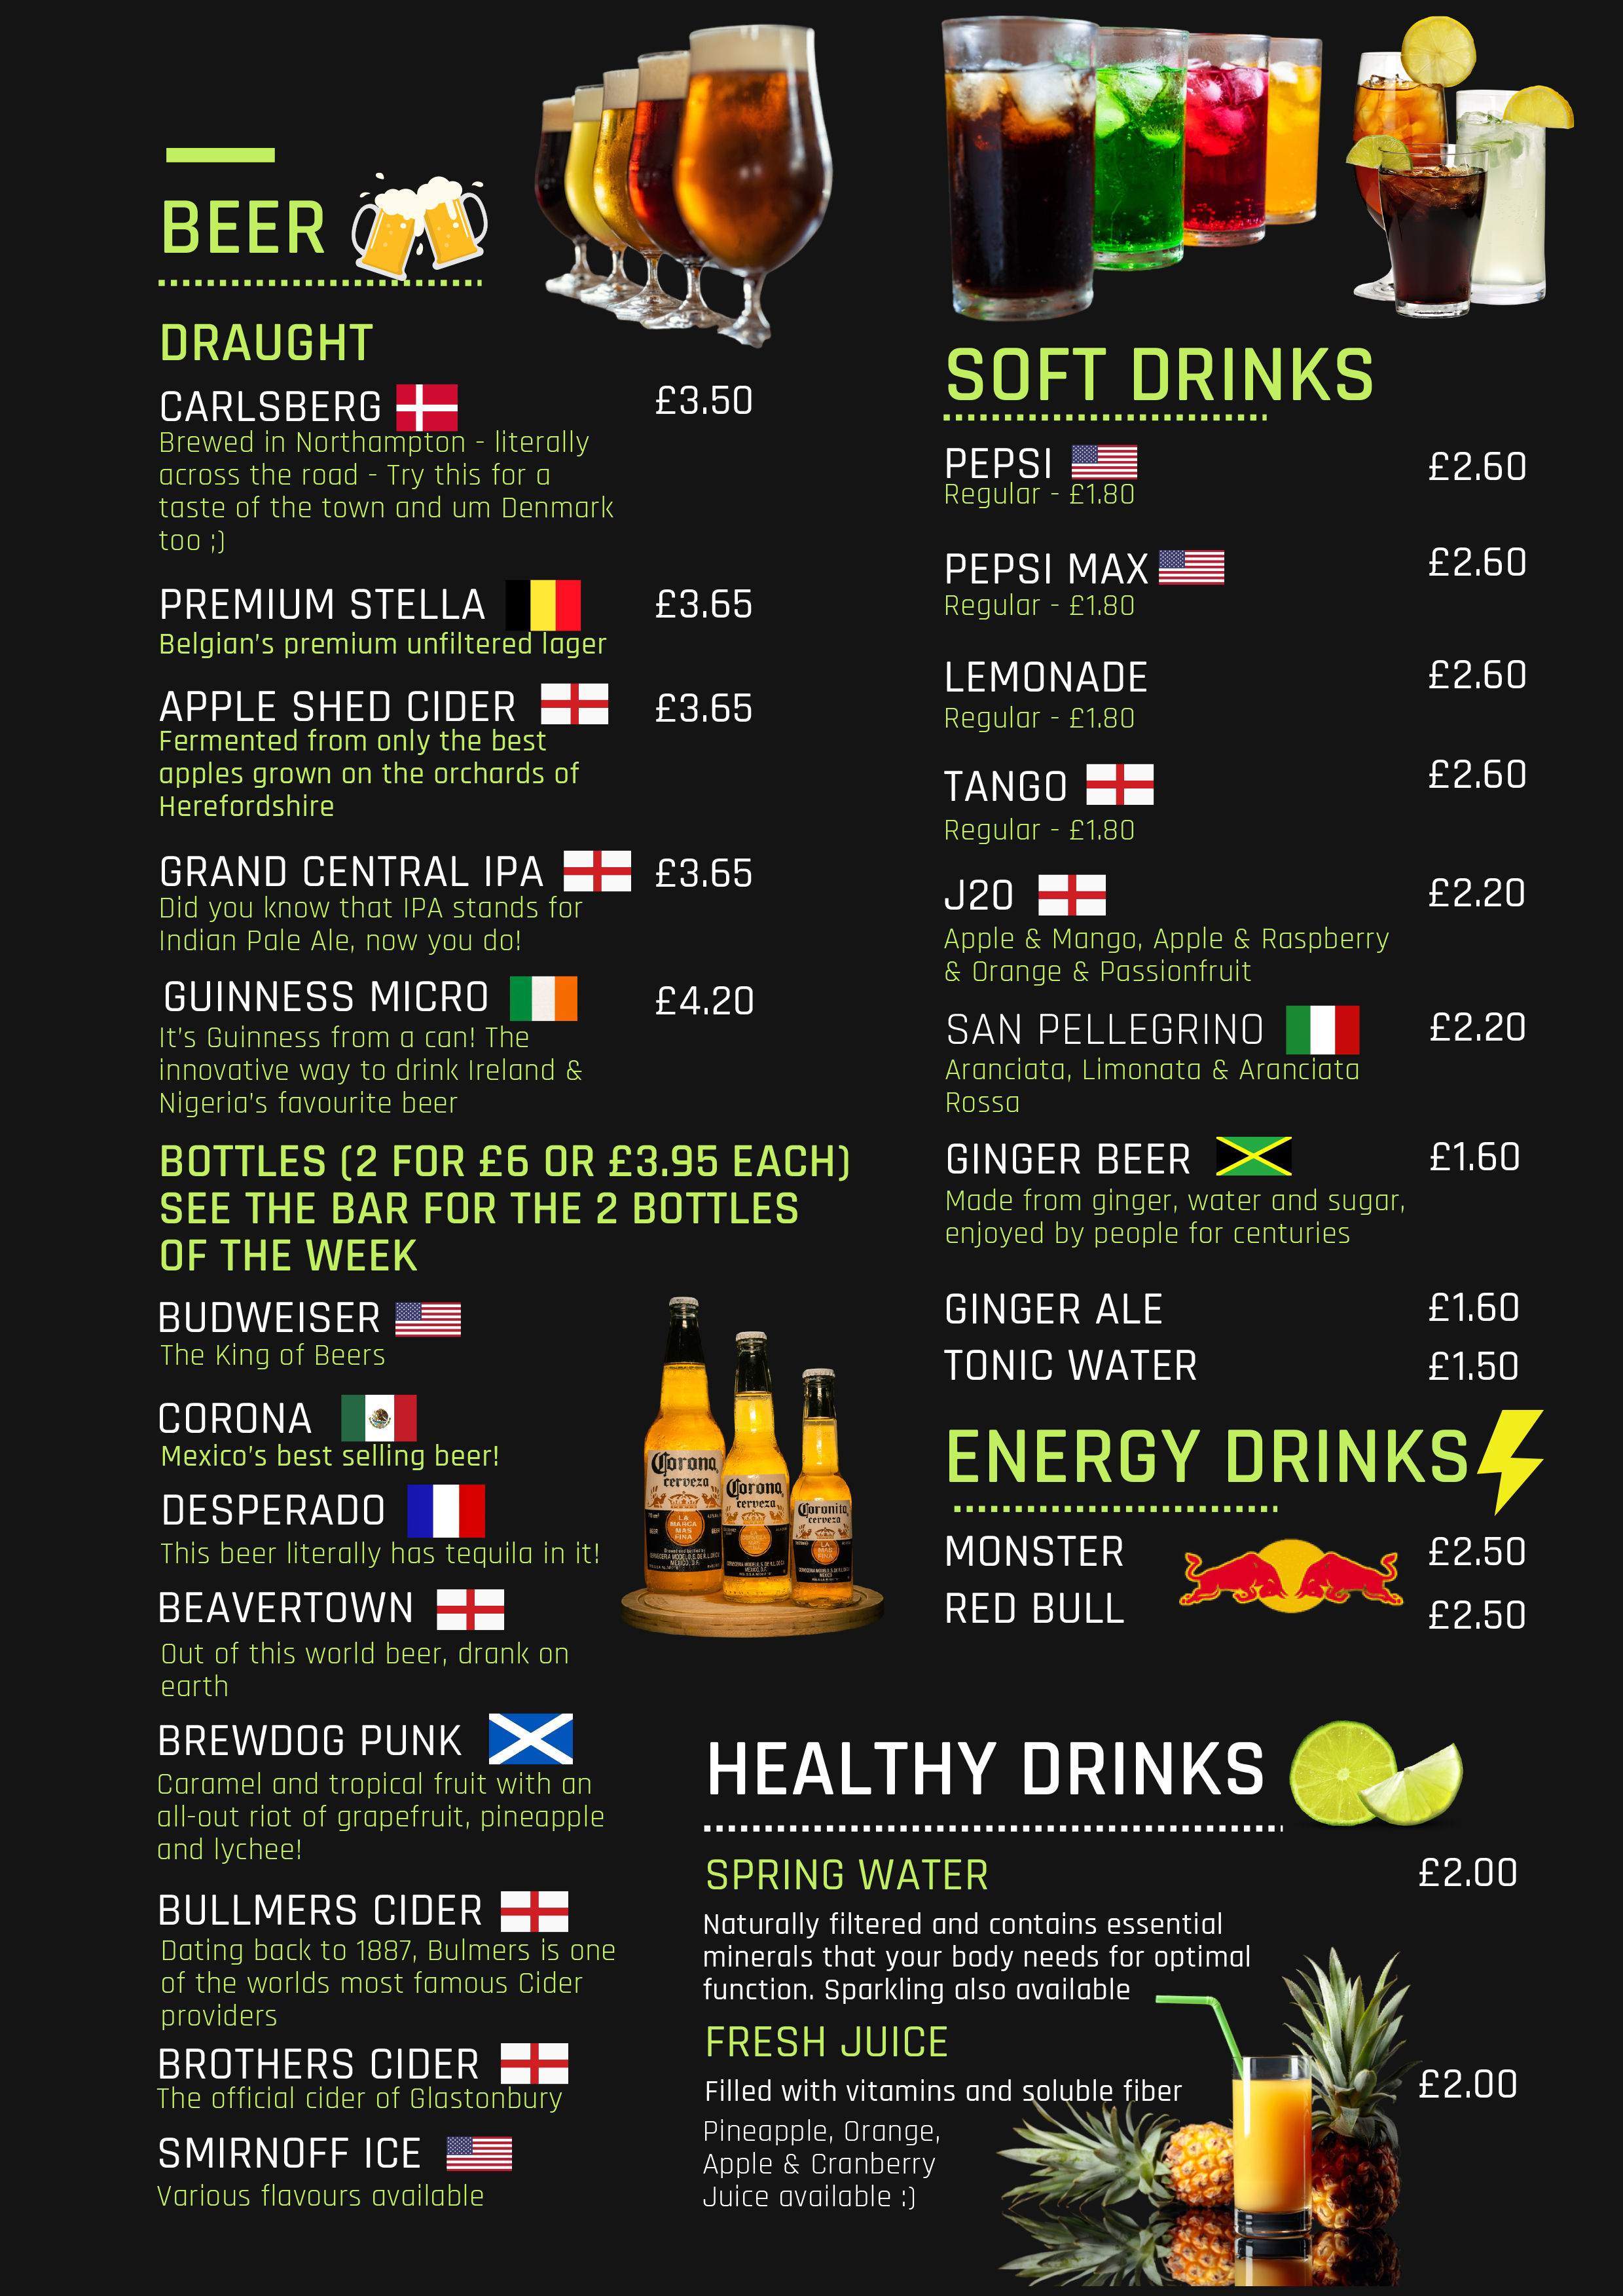 Page 2: Beer, Soft Drinks, Energy Drinks, Healthy Drinks